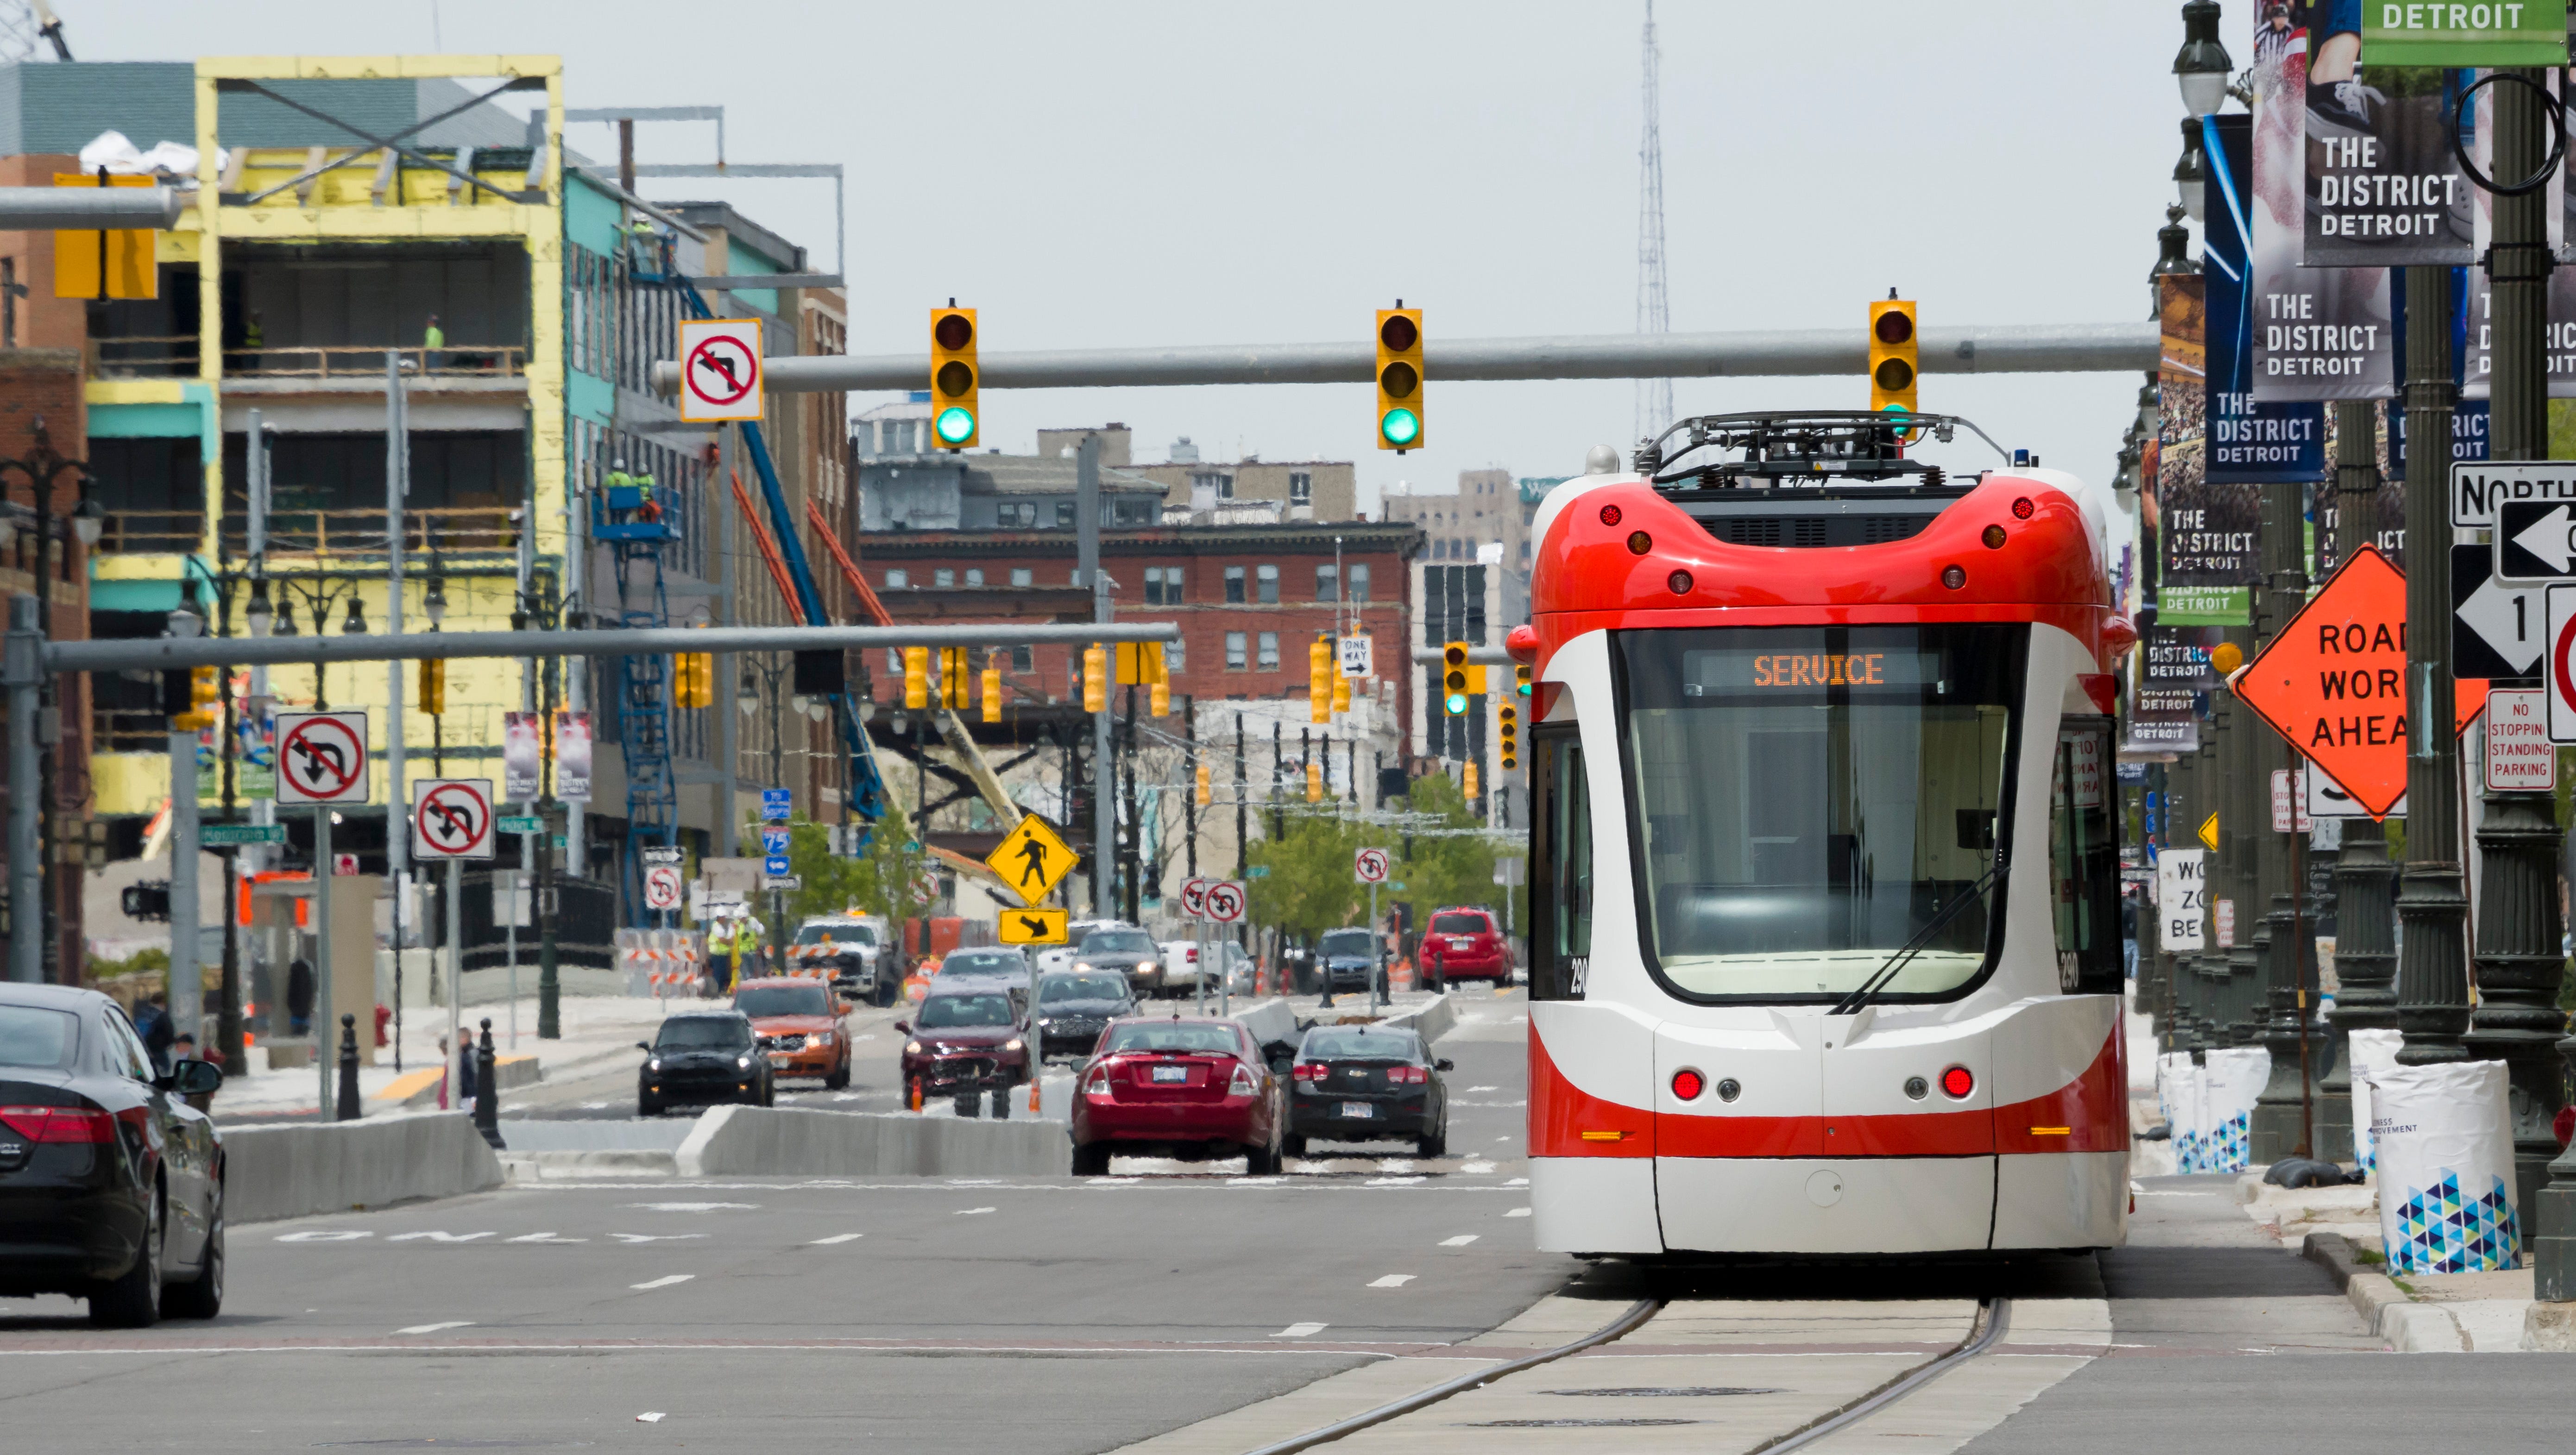 With only a few days left before the QLine opens to the public, street cars continue testing up and down Woodward in Detroit on May 9, 2017.